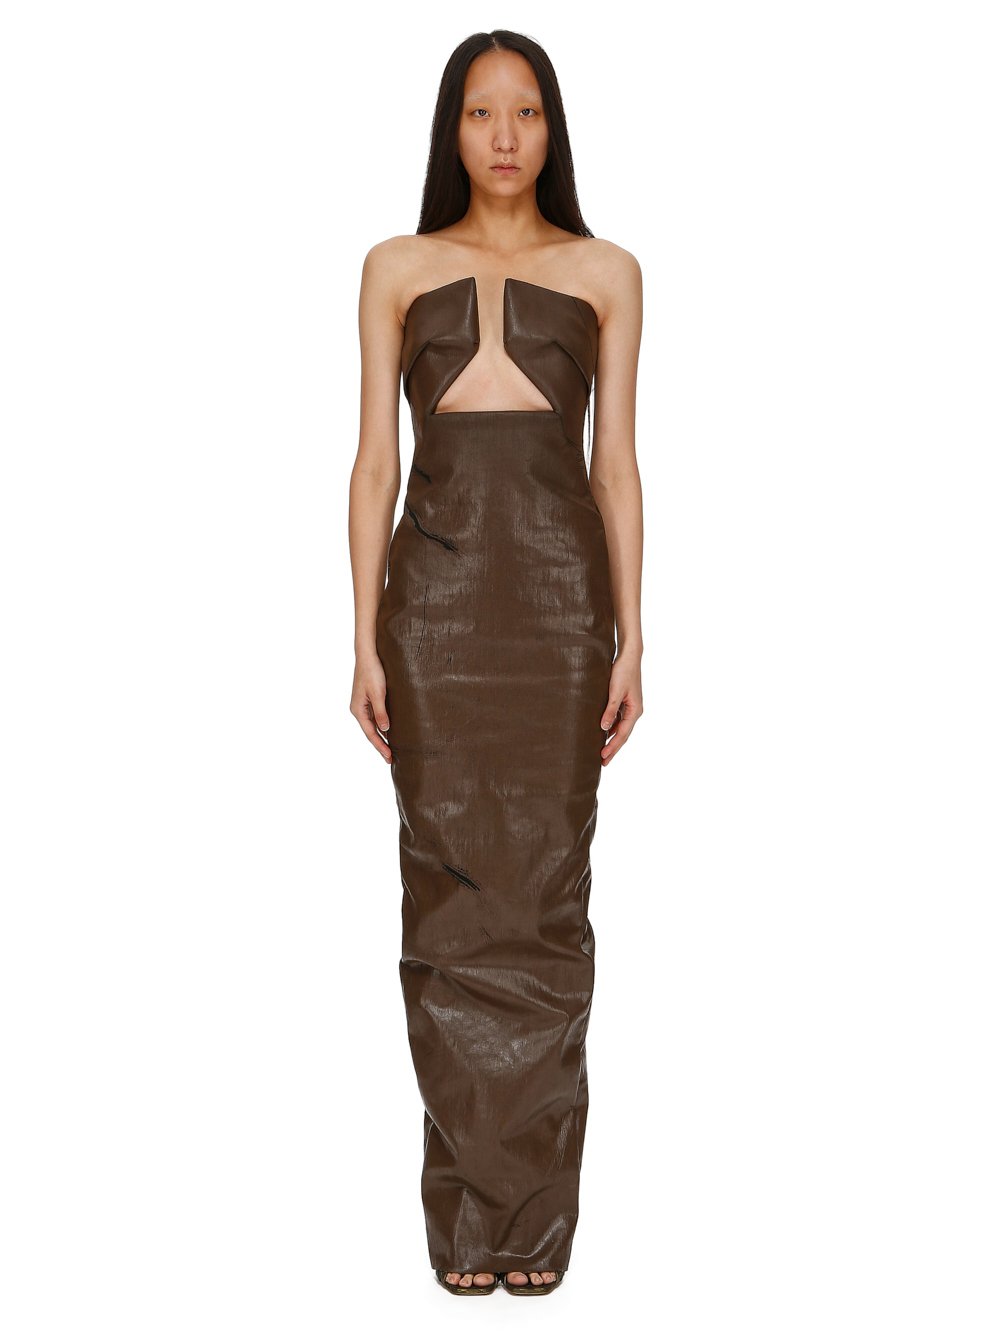 RICK OWENS FW23 LUXOR PRONG GOWN IN BROWN CRACKED STRETCH DENIM